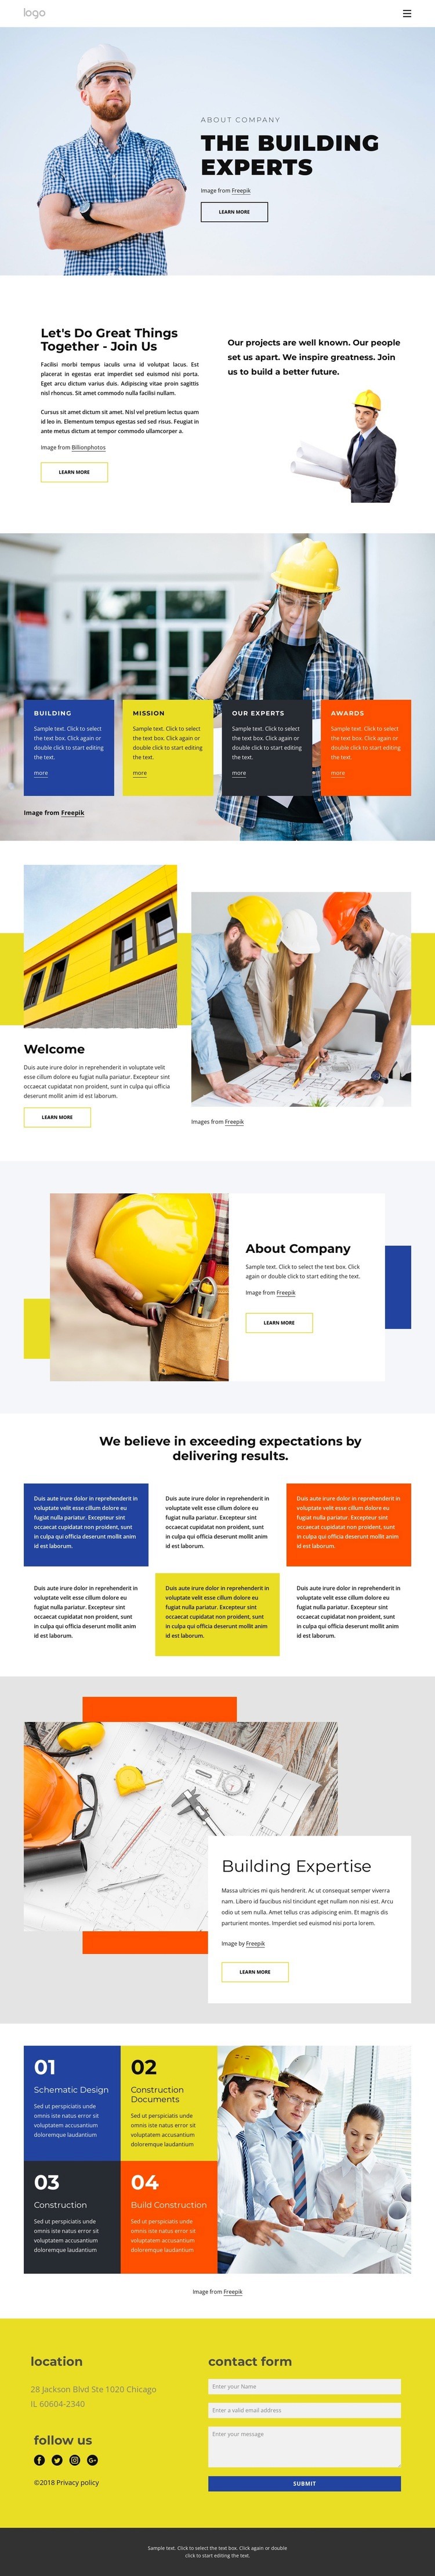 Building experts company Web Page Design